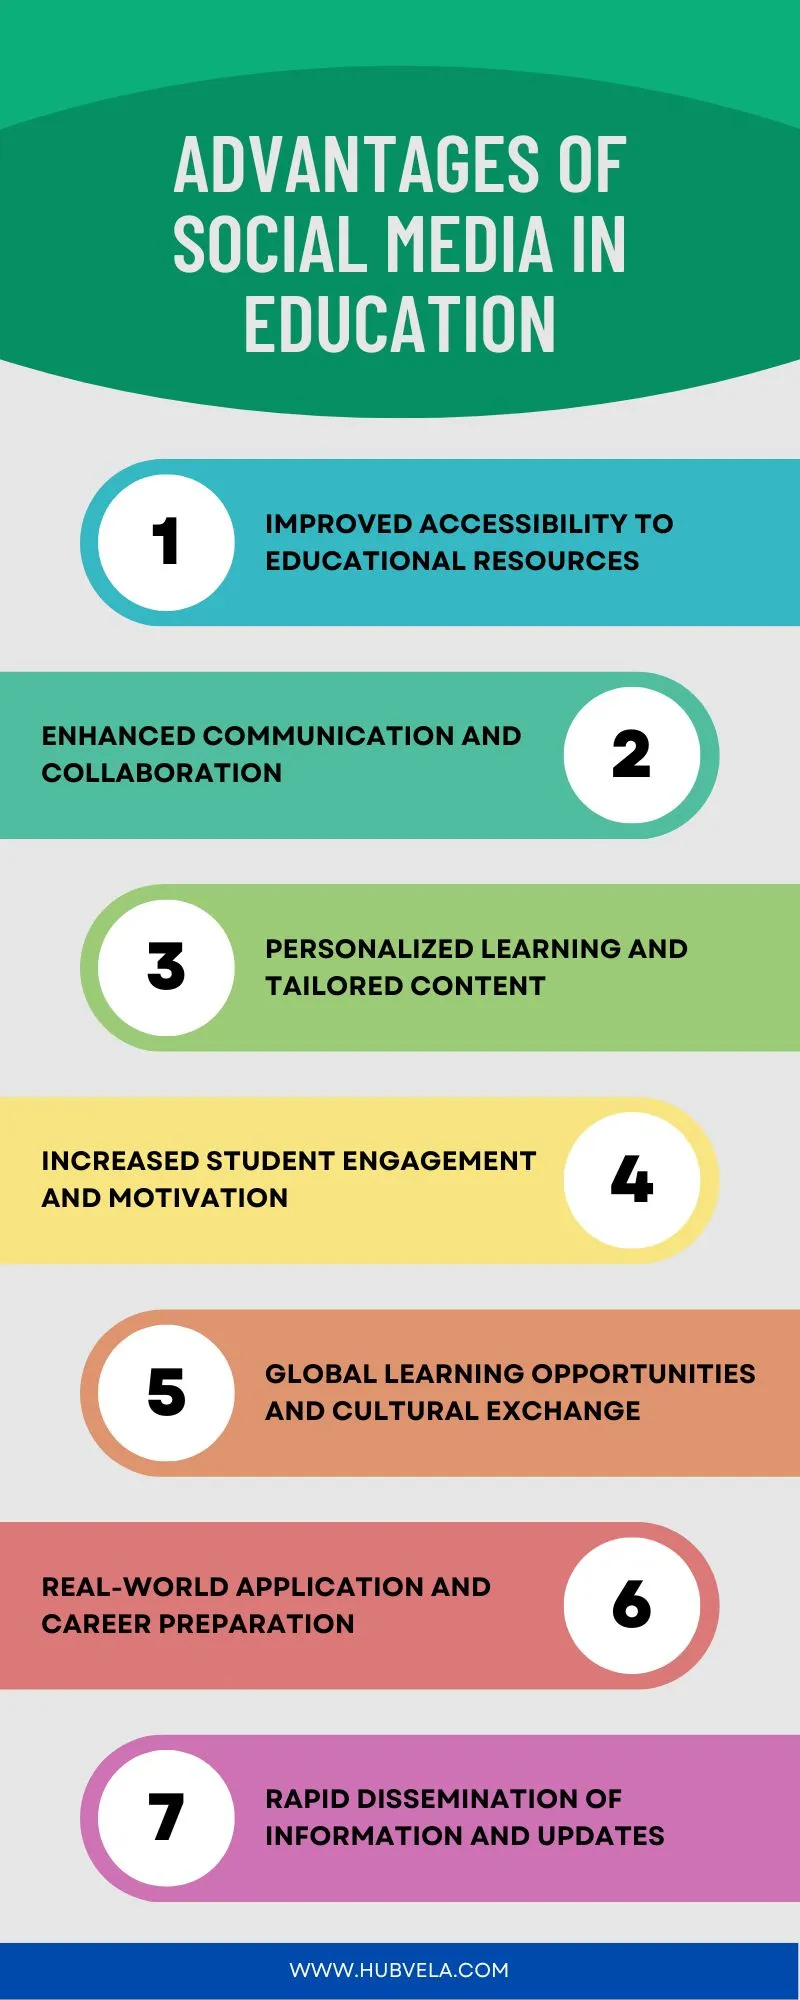 Advantages of Social Media in Education infographic